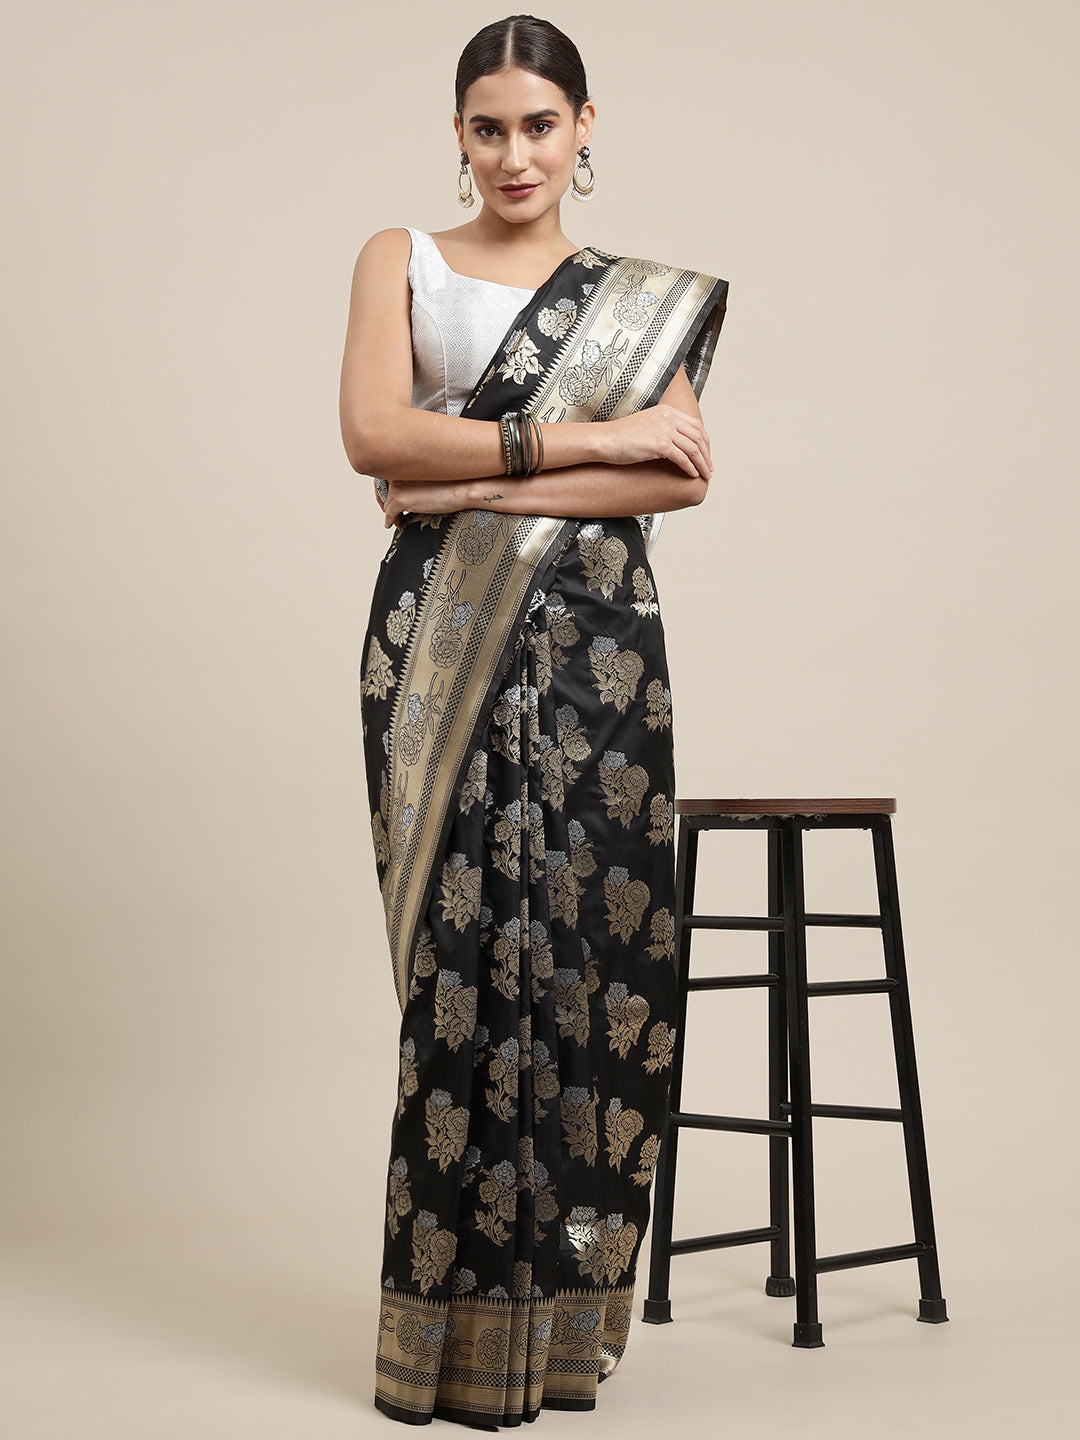 Black Color Latest Bollywood Collection Banarasi Silk Saree Silver And Gold Toned Zari Weaving Work With Blouse